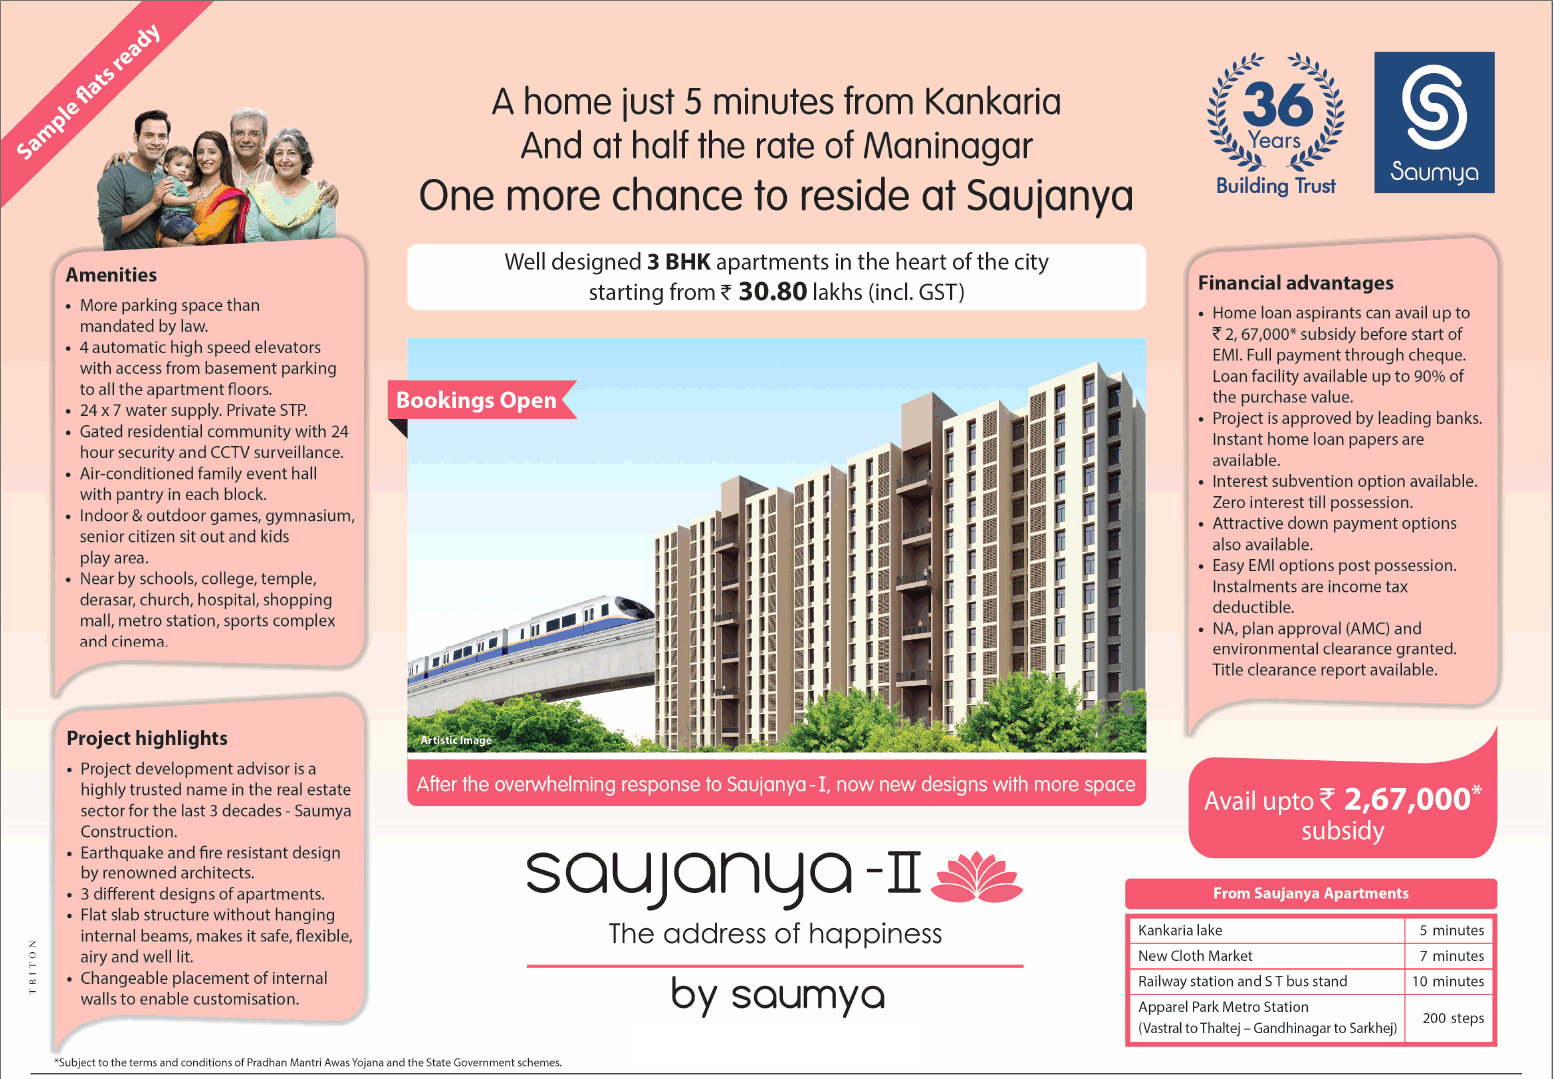 Avail upto Rs 2.67 lakhs subsidy offer at Soumya Saujanya - II in Ahmedabad Update